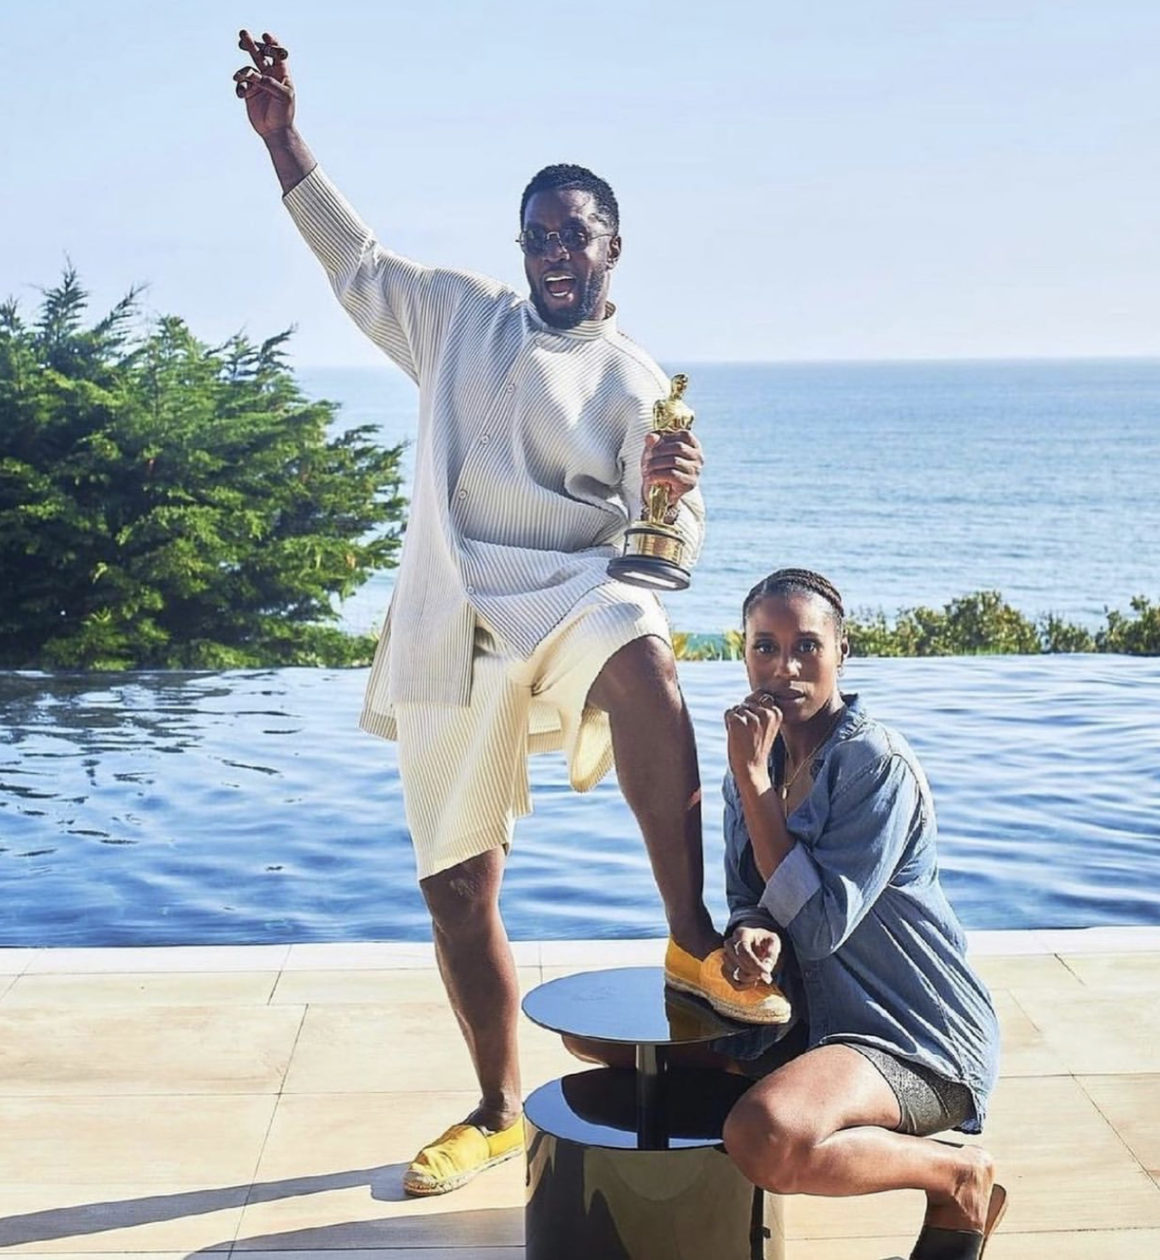 https://fashionbombdaily.com/wp-content/uploads/2021/06/Diddy-Hosts-Memorial-Day-Cookout-in-Homme-Plisse-Issey-Miyake-Look-and-Fendi-Yellow-Espadrilles8-1160x1260.jpg